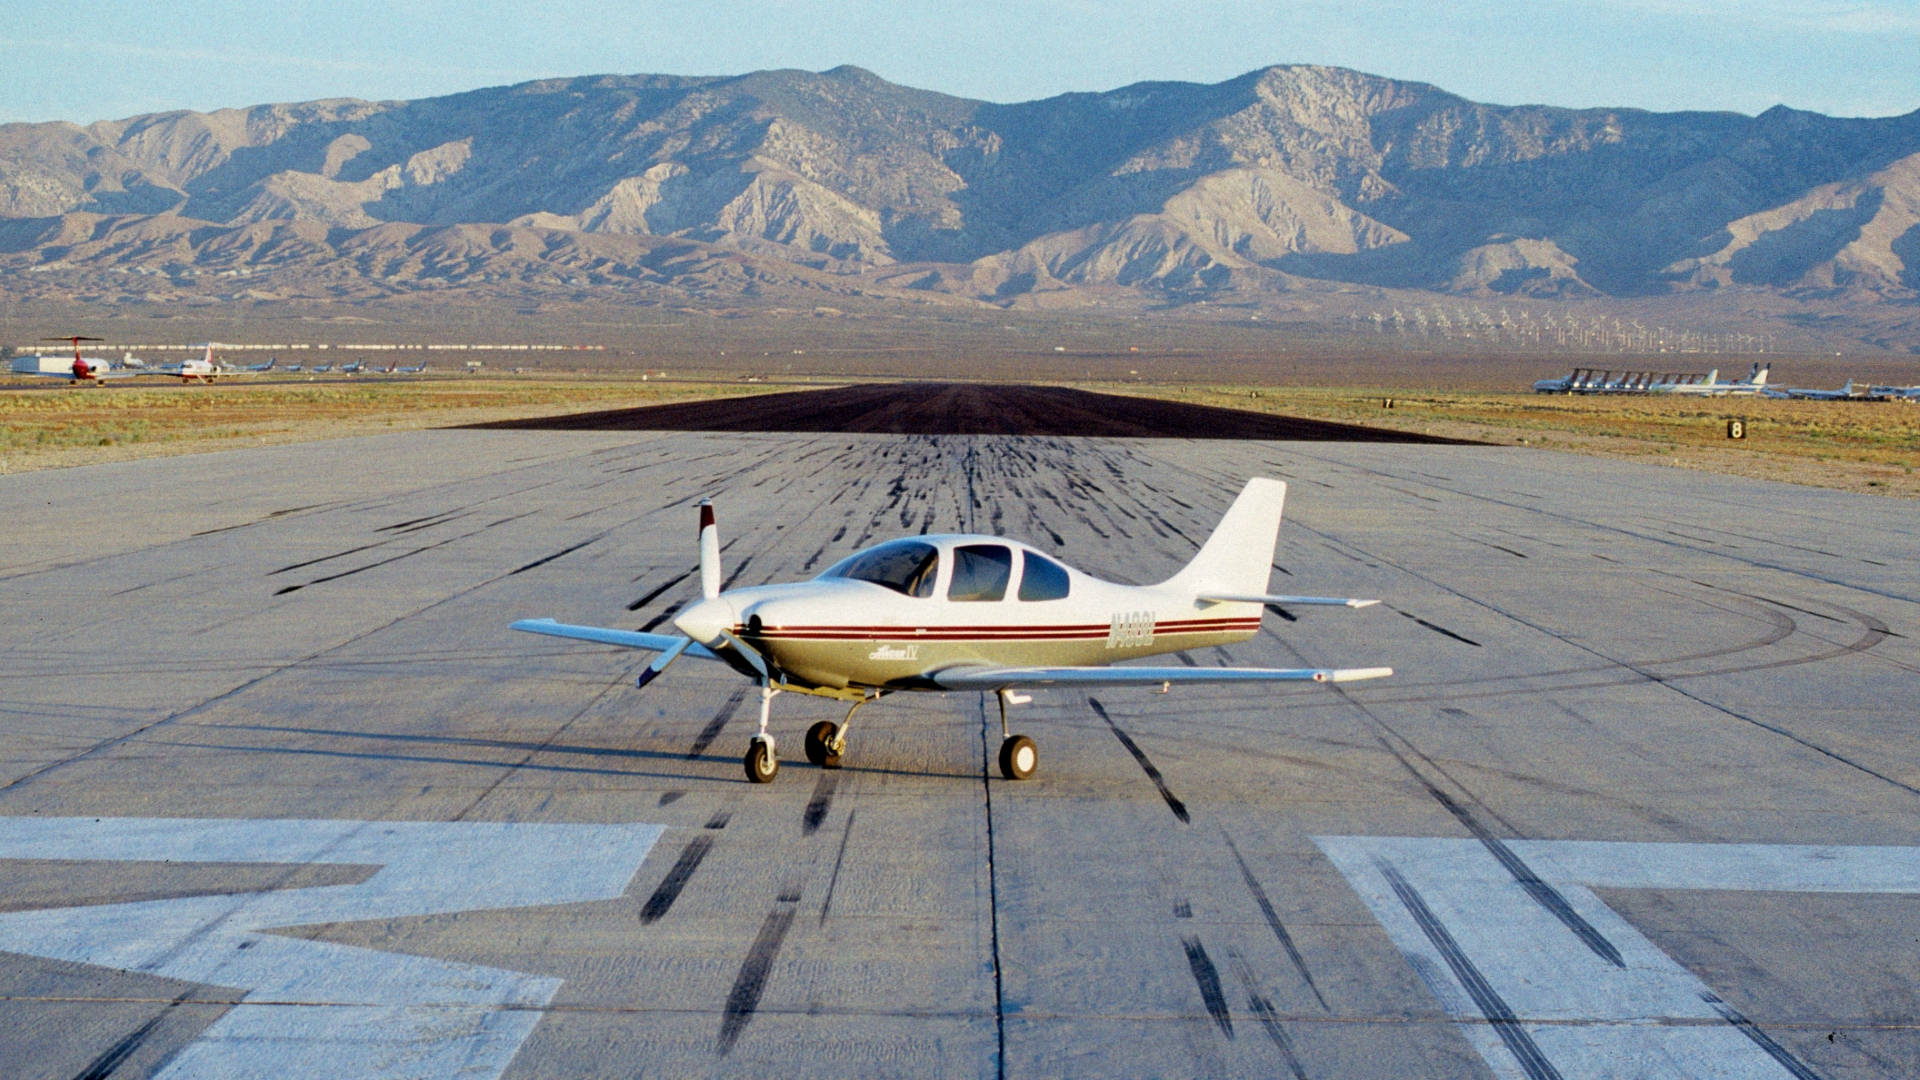 Private Plane On Runway Background